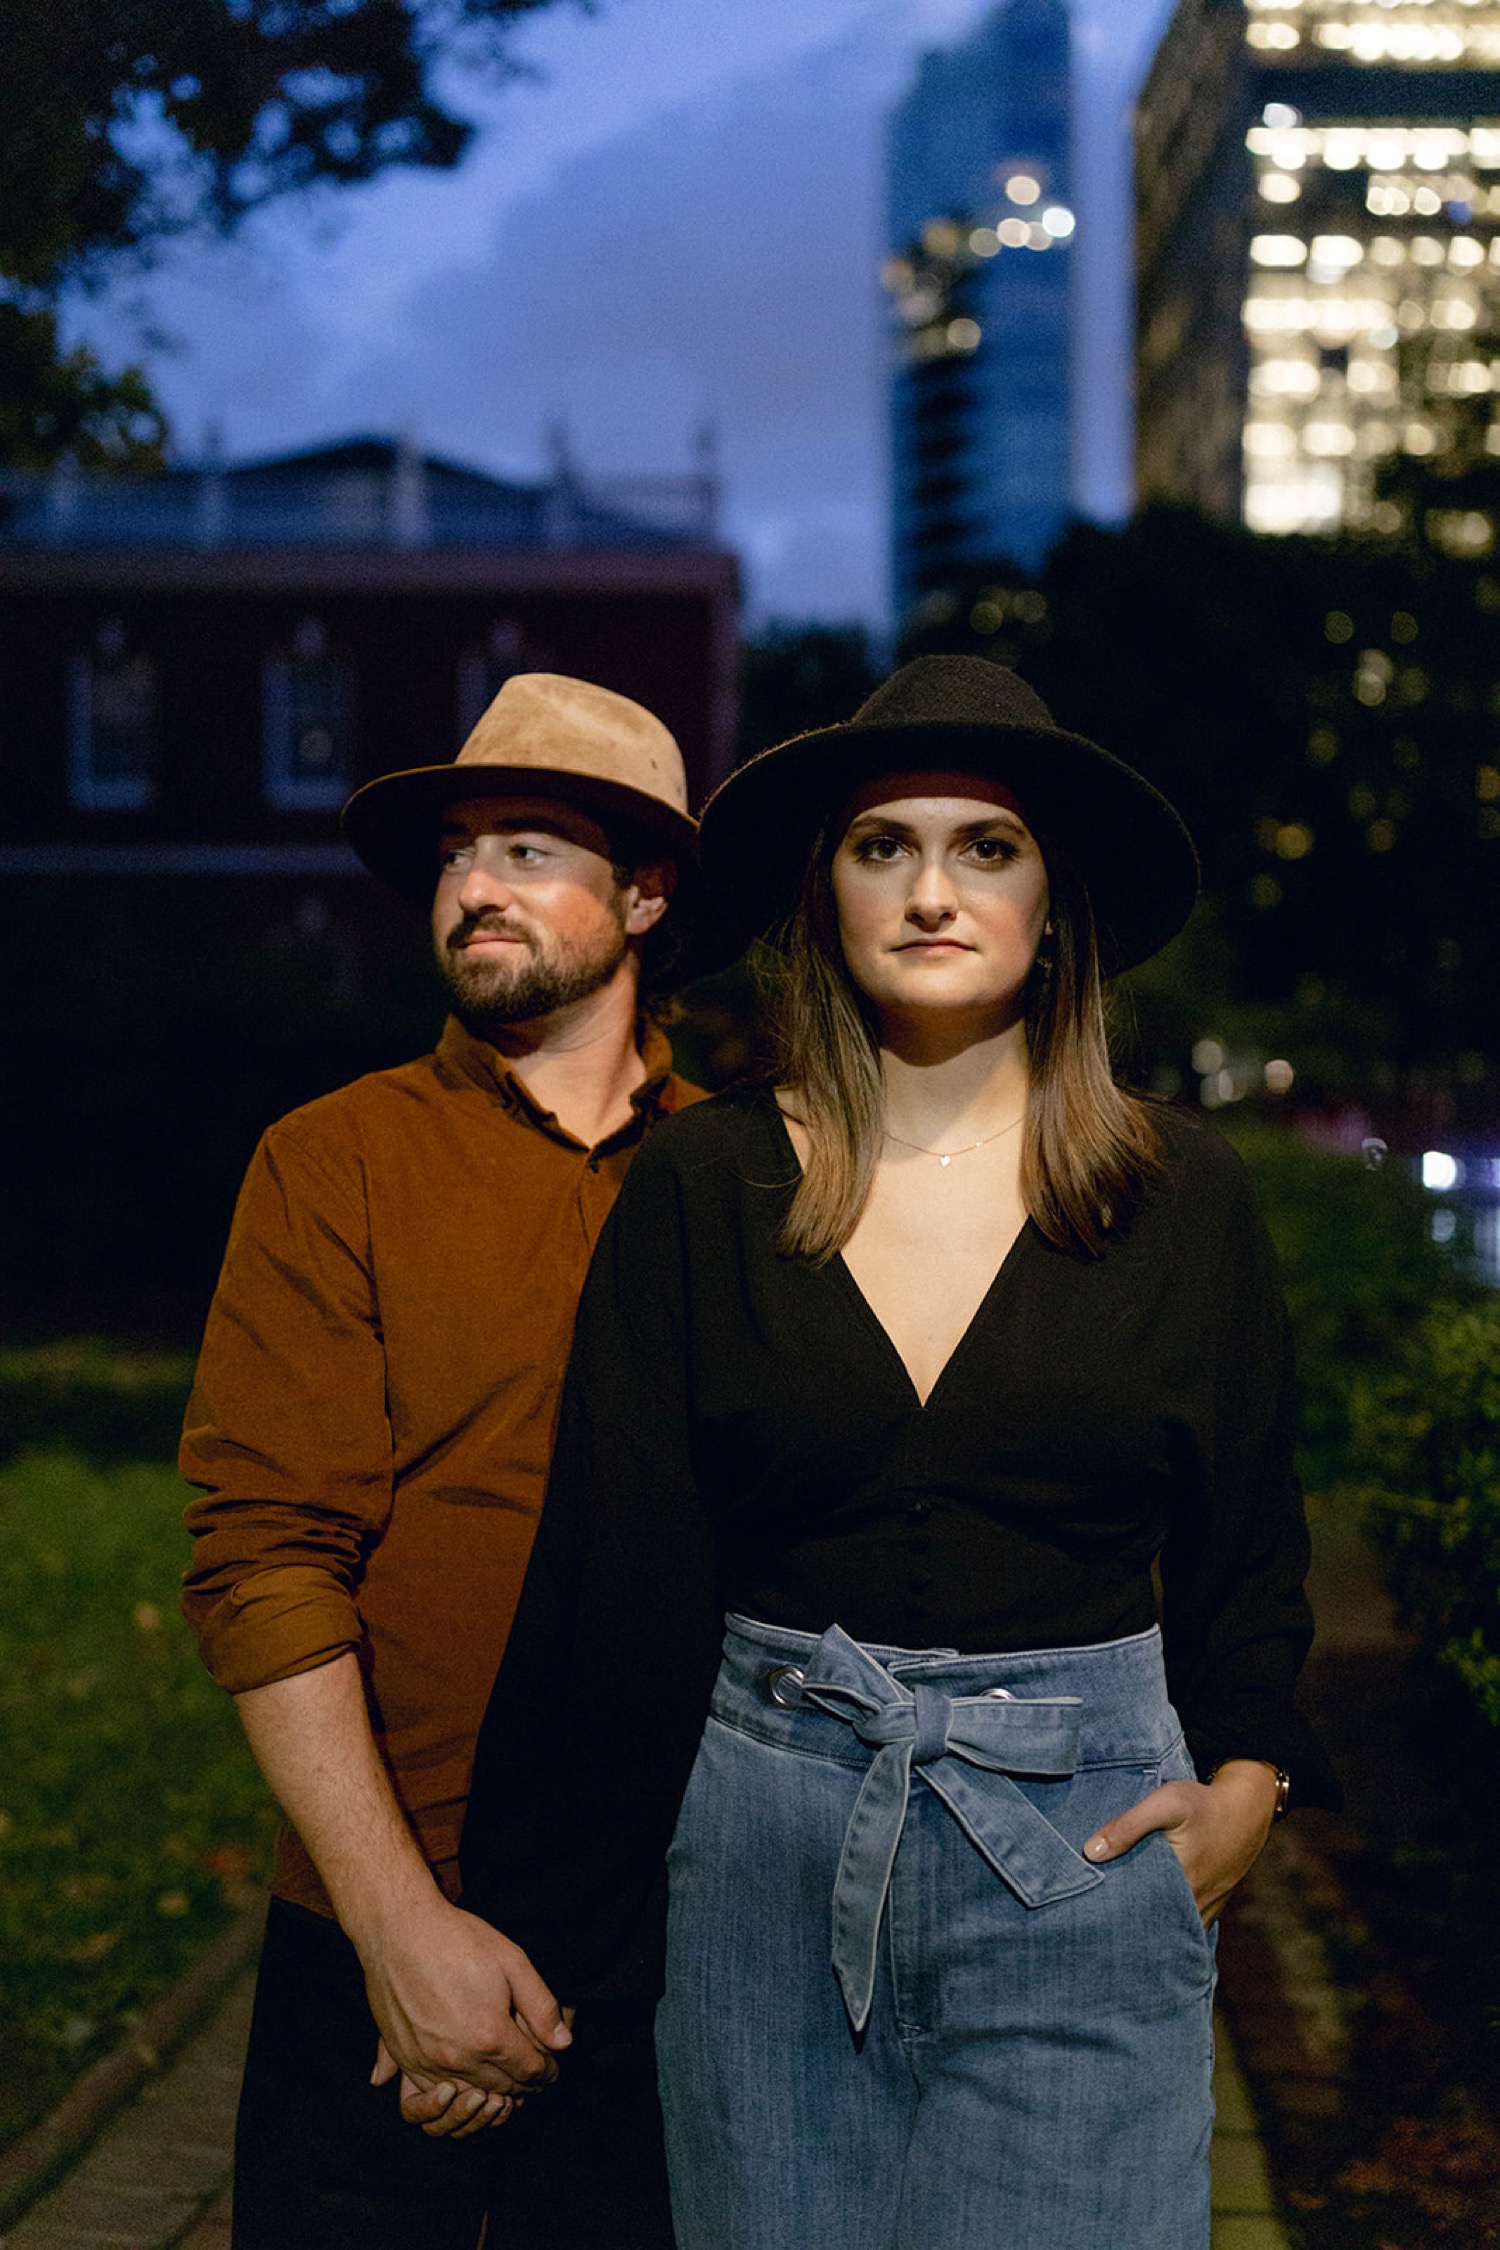 serious couple engagement photo with hats